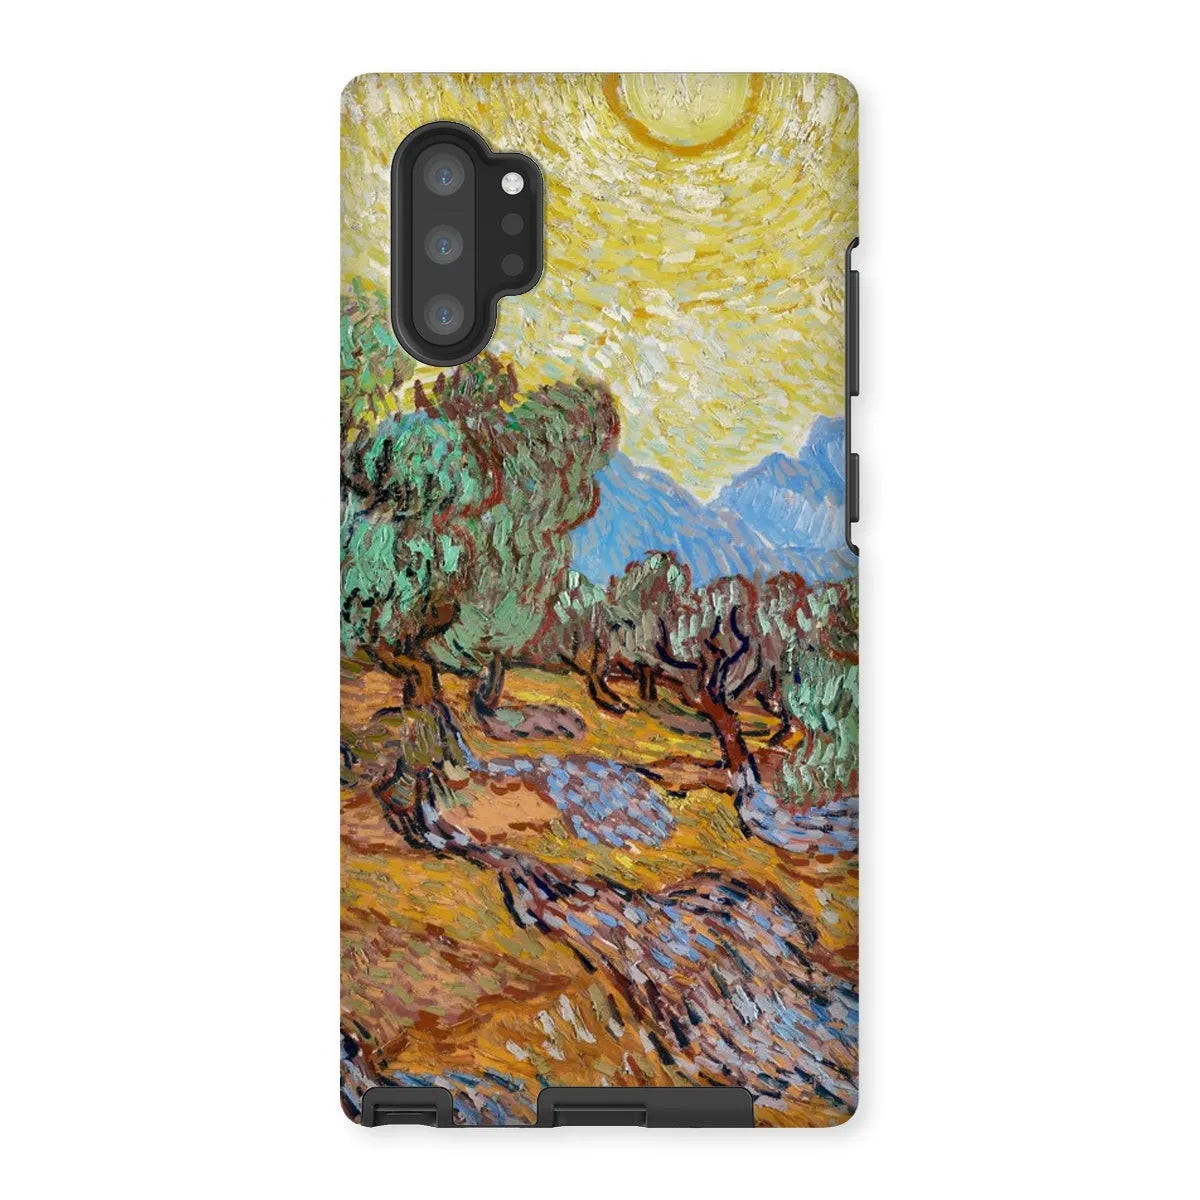 Olive Trees Too - Impressionist Phone Case - Vincent Van Gogh - Samsung Galaxy Note 10p / Matte - Mobile Phone Cases